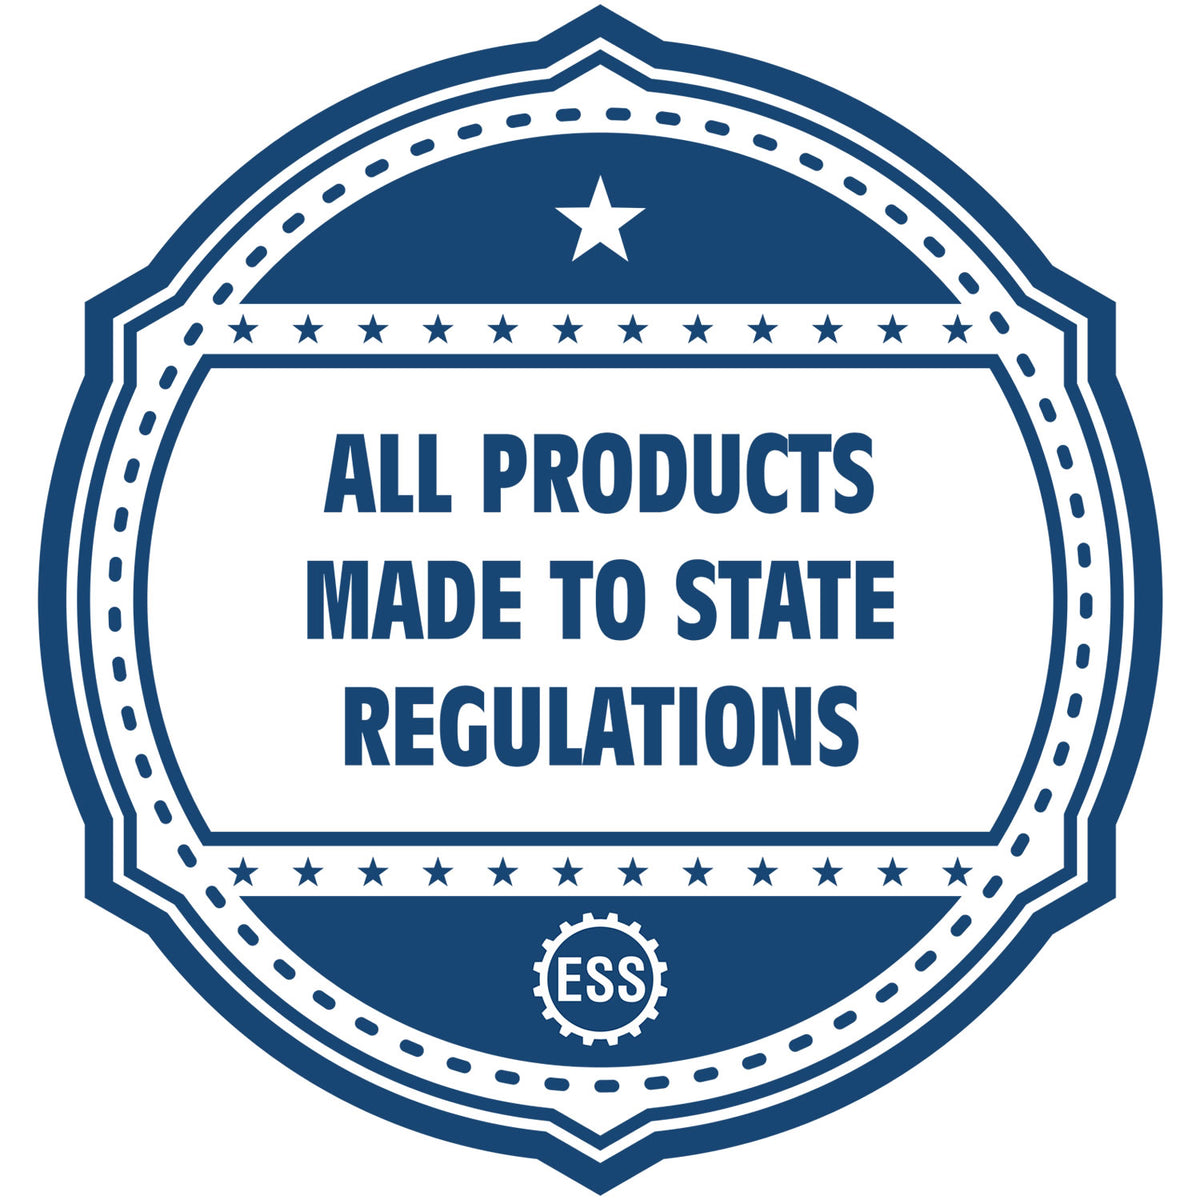 An icon or badge element for the Slim Pre-Inked Alaska Professional Engineer Seal Stamp showing that this product is made in compliance with state regulations.